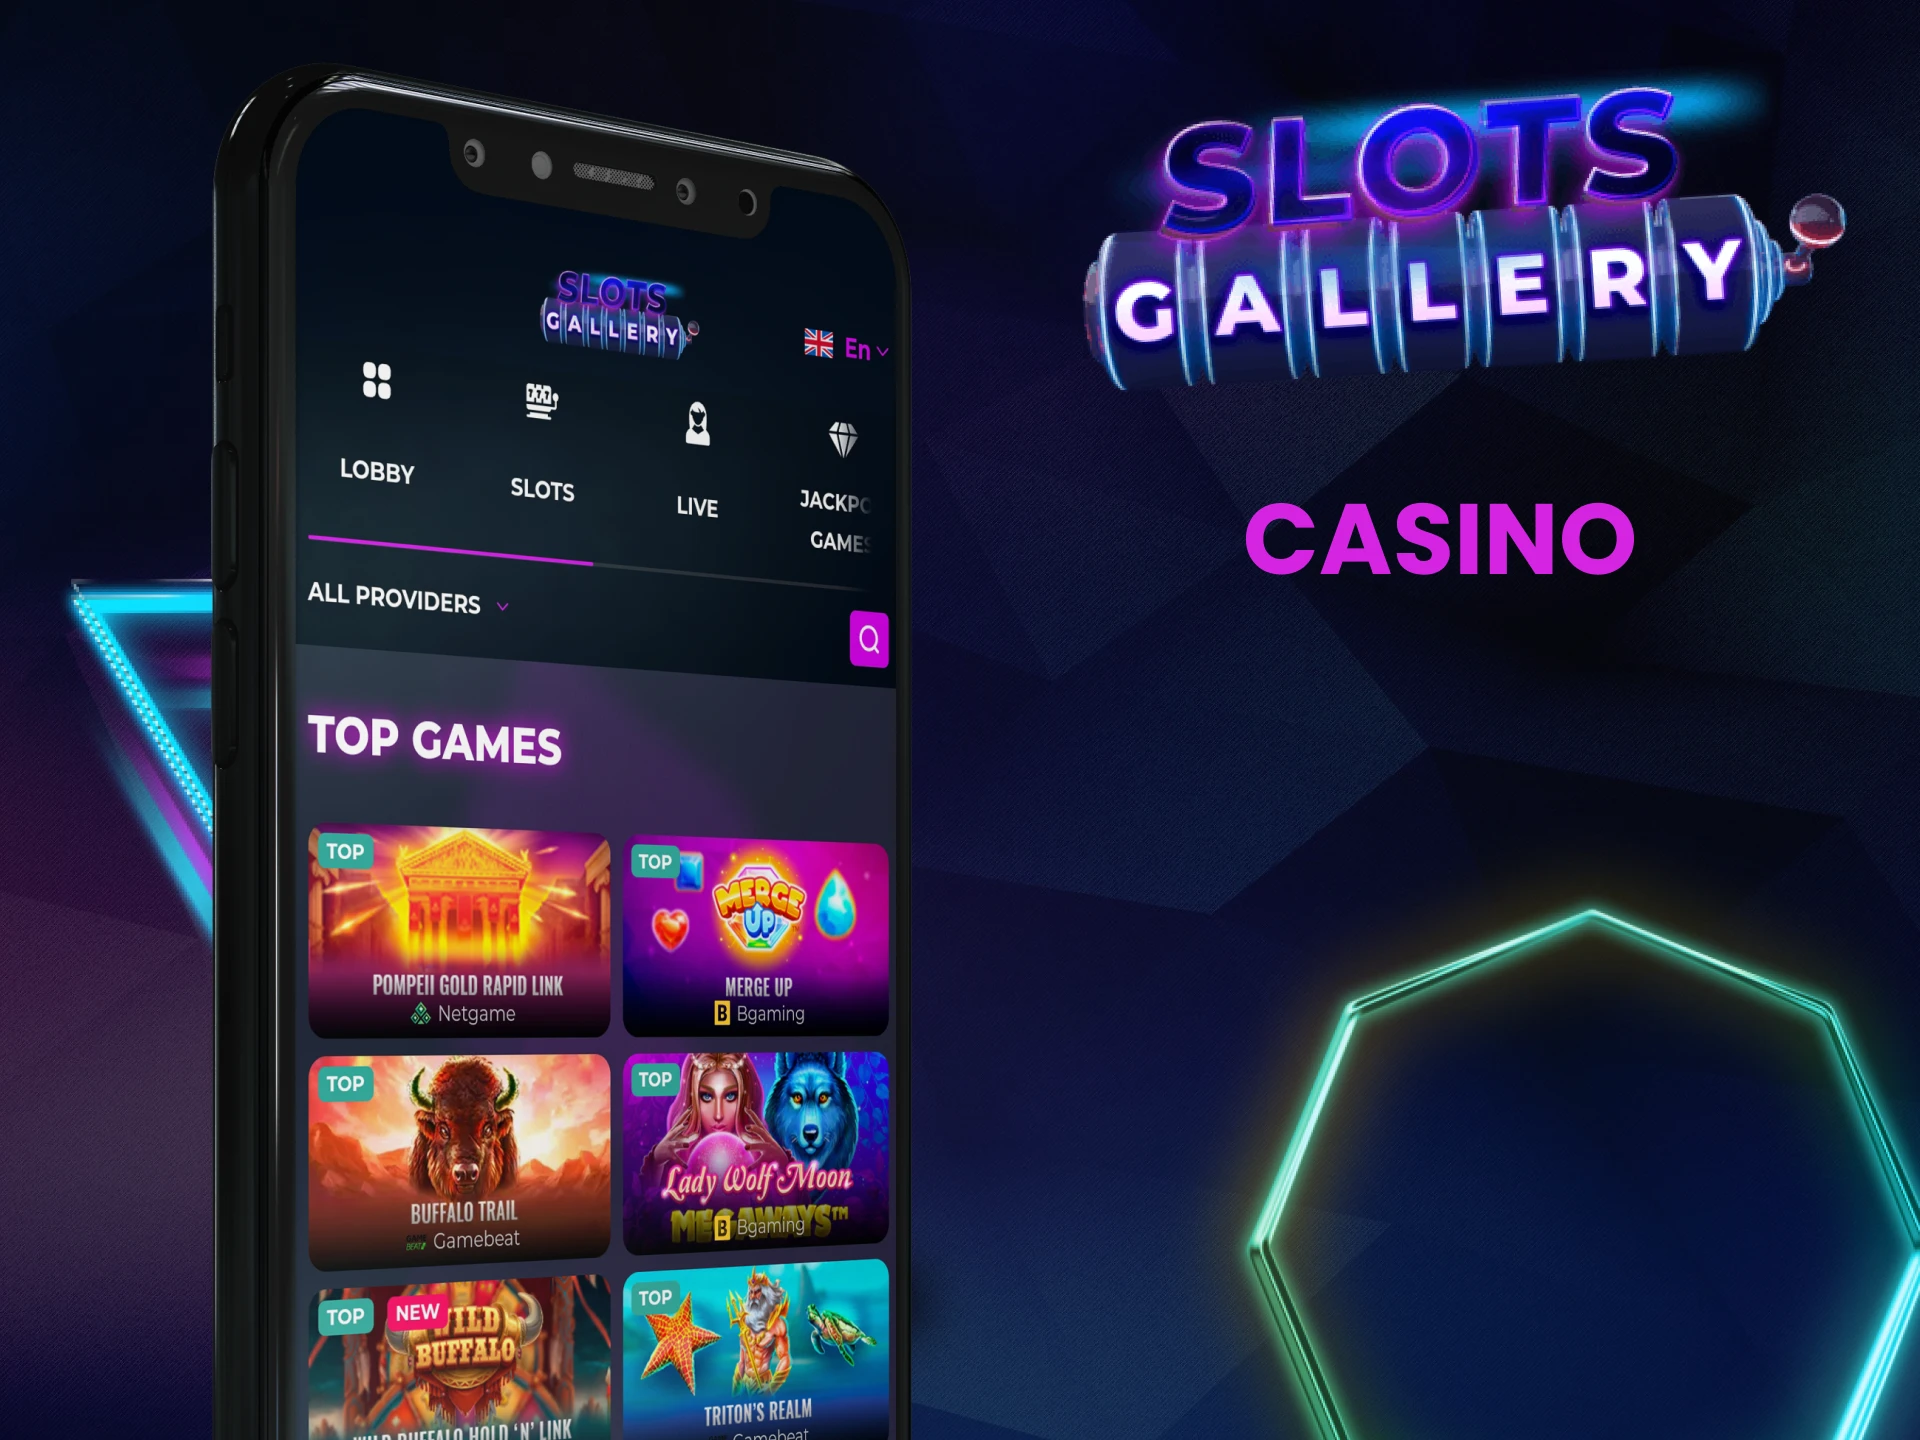 Choose a casino from the SlotsGallery application.